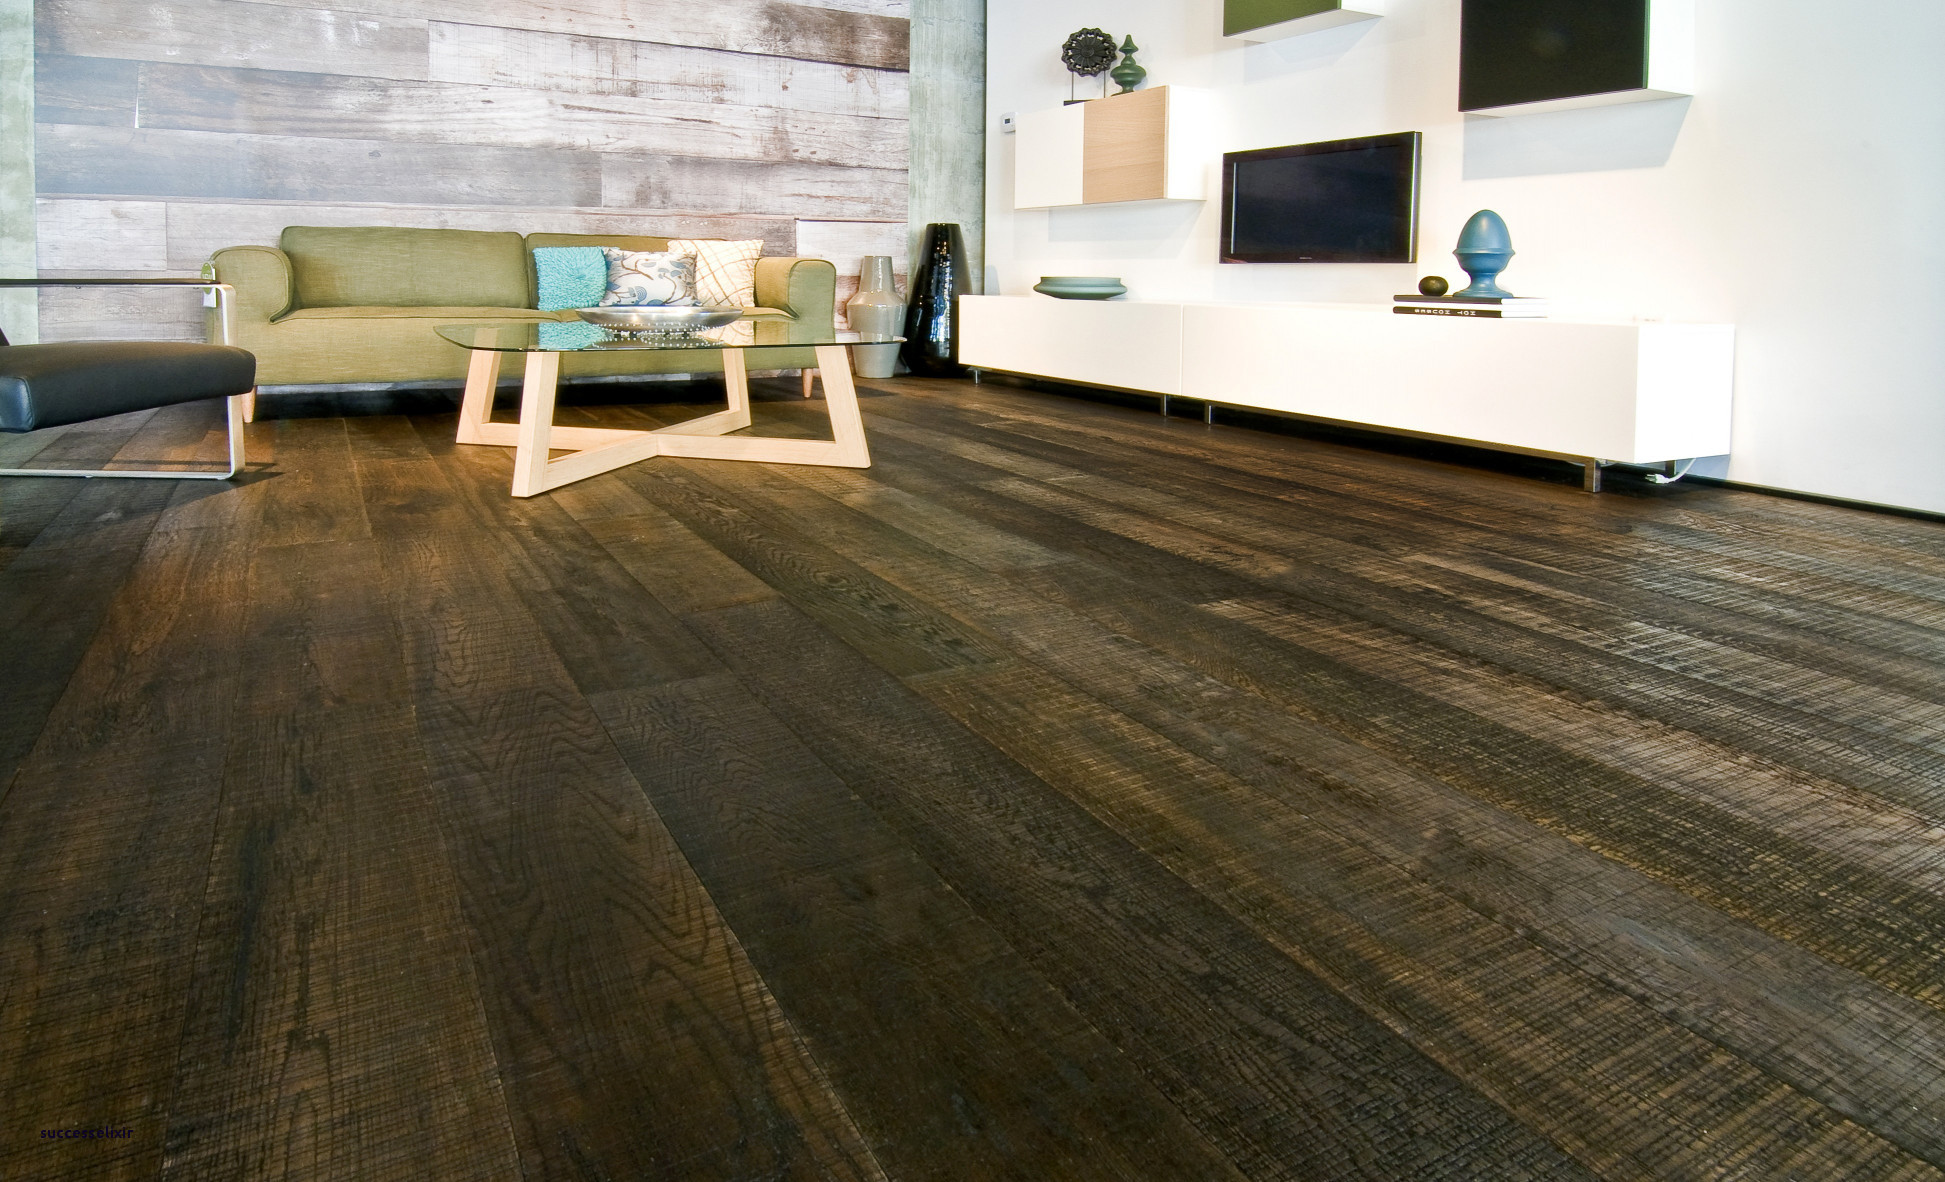 27 Famous Laminate Wood Flooring Vs Hardwood Cost 2024 free download laminate wood flooring vs hardwood cost of 23 fancy unfinished wood flooring image with regard to full size of bedroom engaging discount hardwood flooring 5 where to buy inspirational 0d gra